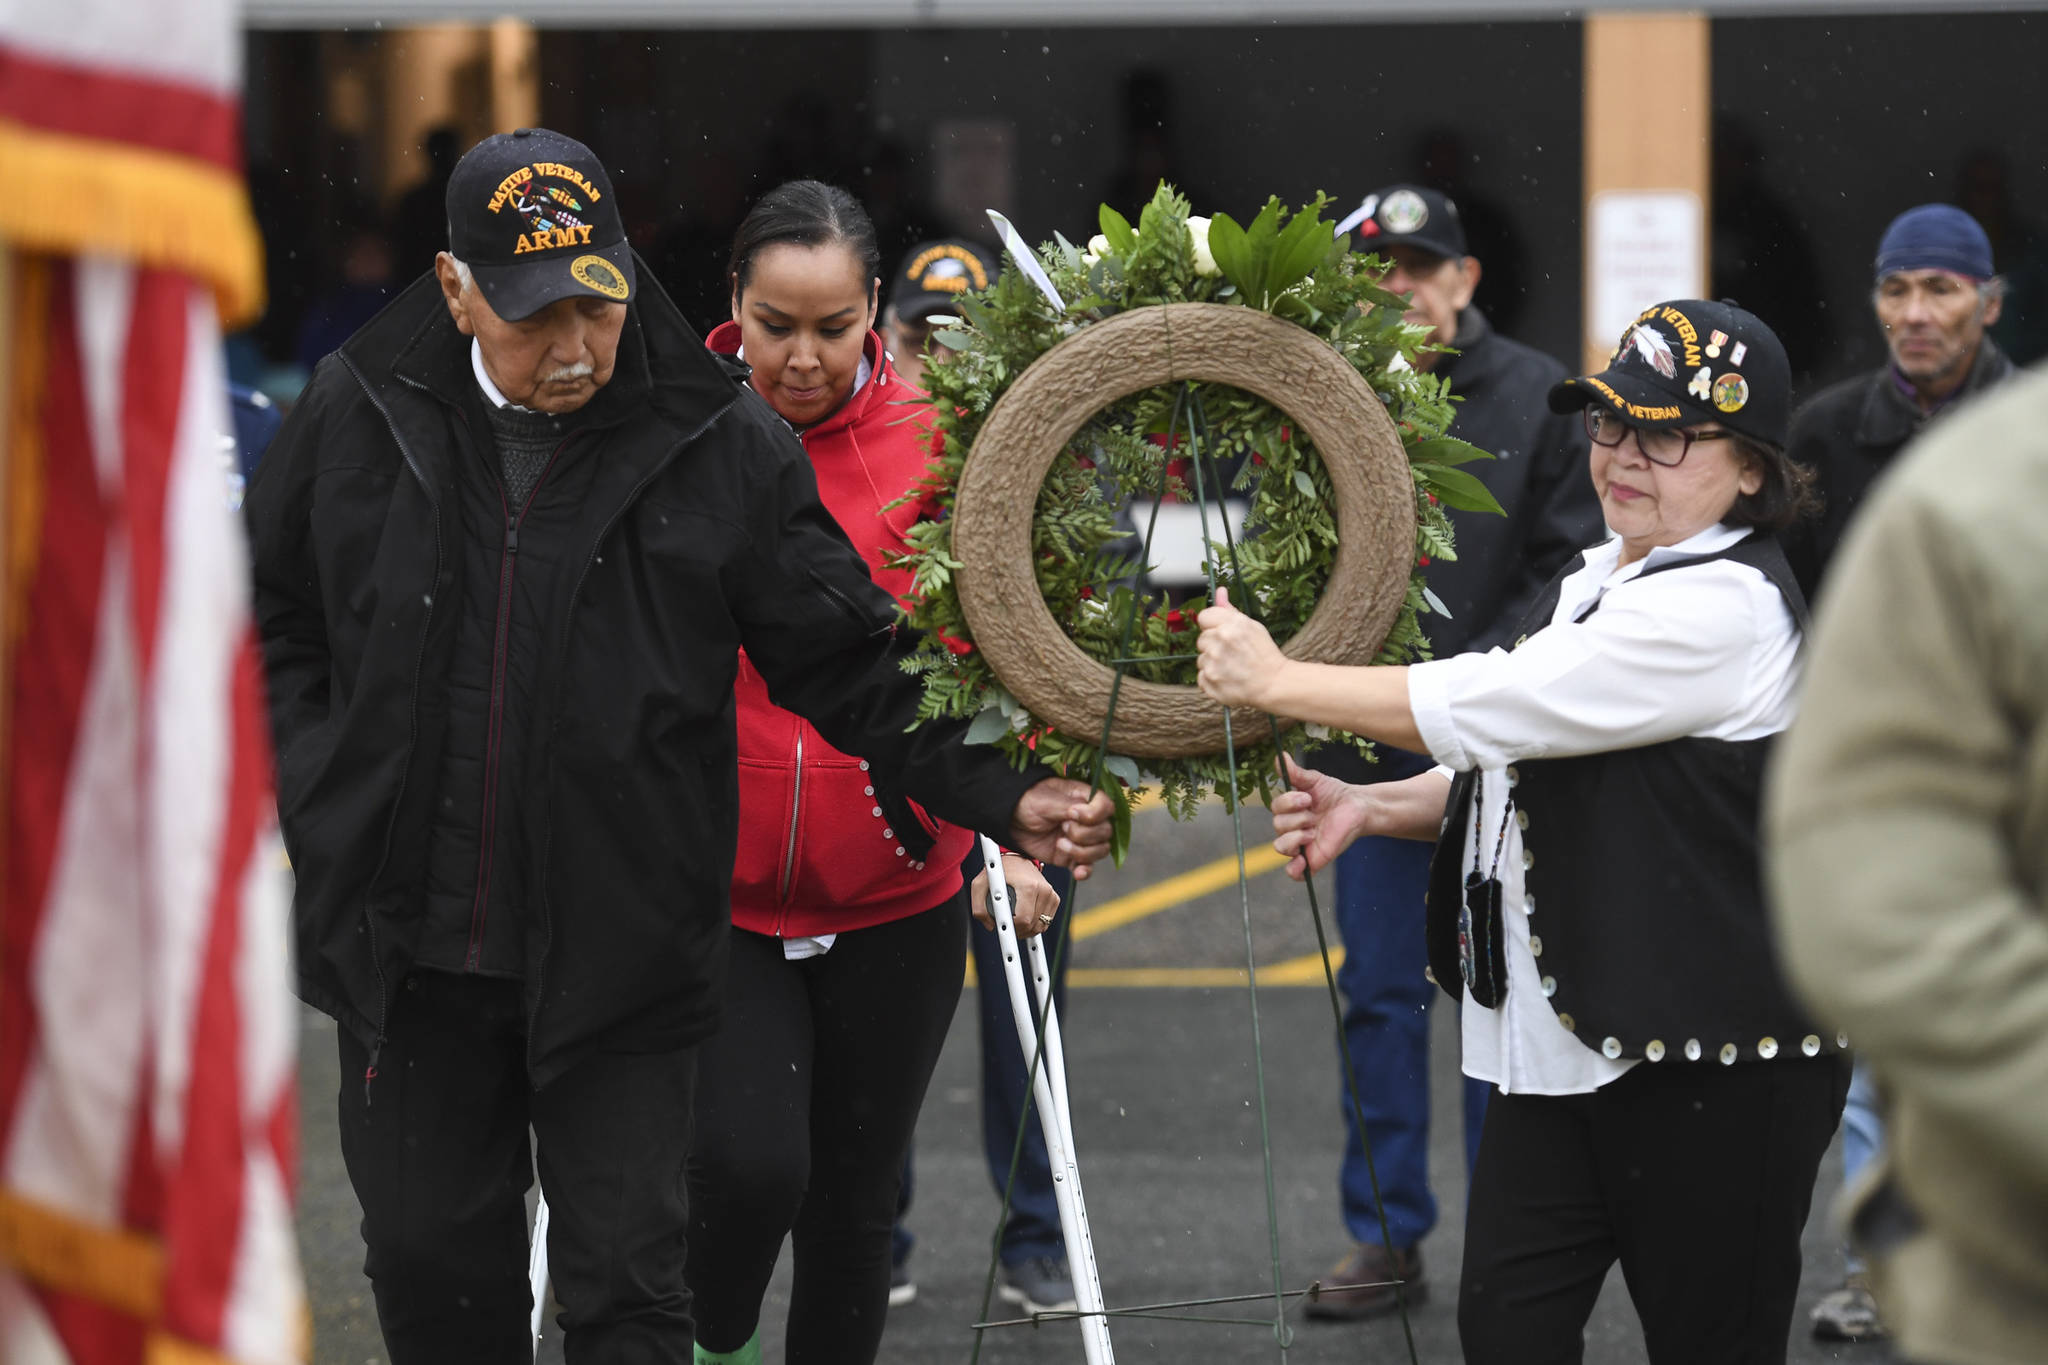 Southeast Alaska Native Veteran’s Ray Wilson, left, Tamera Paul, center, and Val Cooday place a wreath during the Veterans Day Ceremony at the SE Alaska Native Veterans Park on Monday, Nov. 11, 2019. (Michael Penn | Juneau Empire)